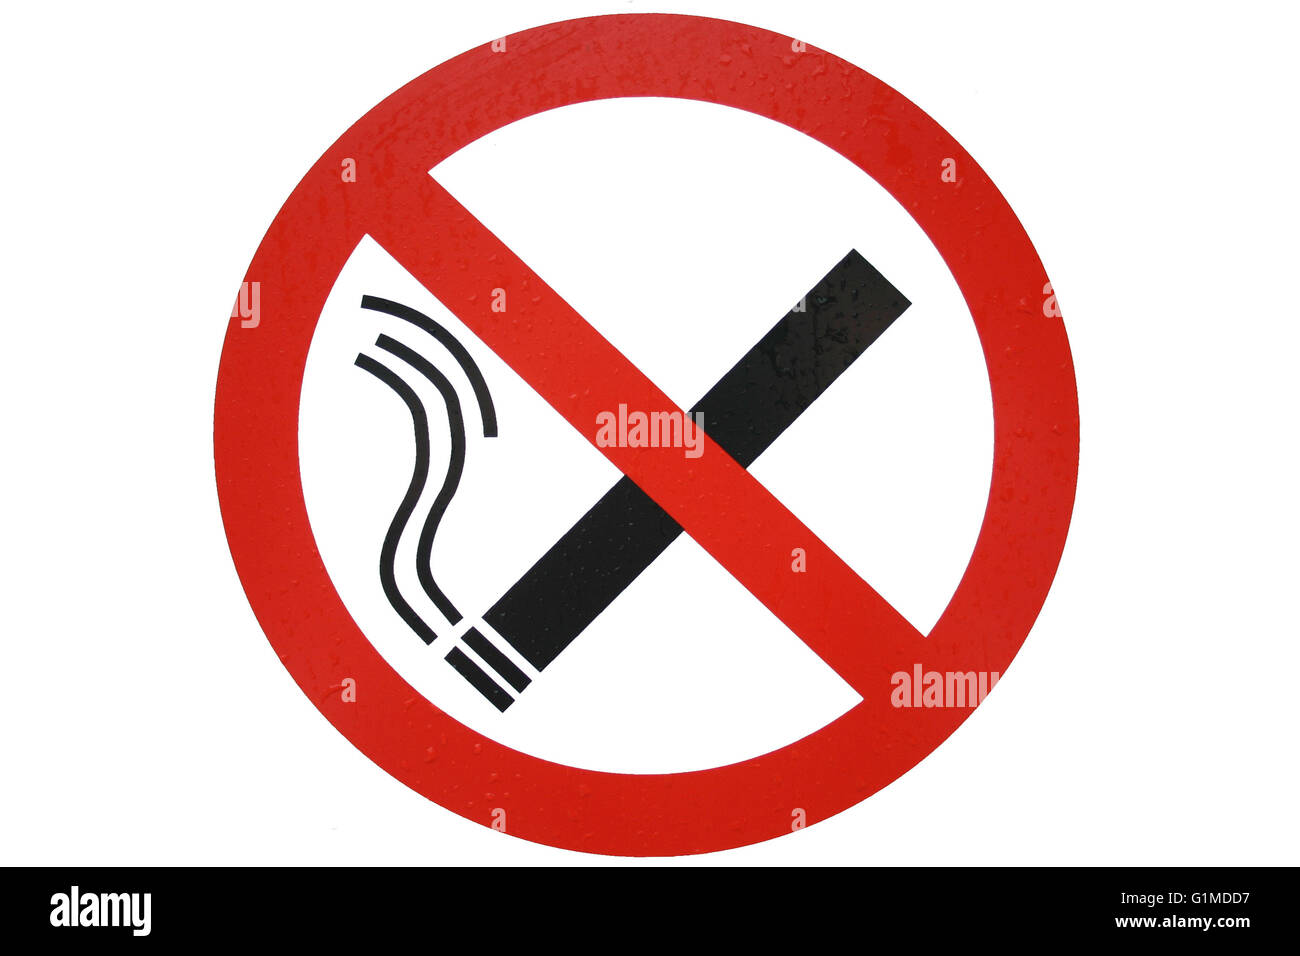 A red circular no smoking sign isolated on white depicting a cigarette in black crossed by a diagonal line Stock Photo